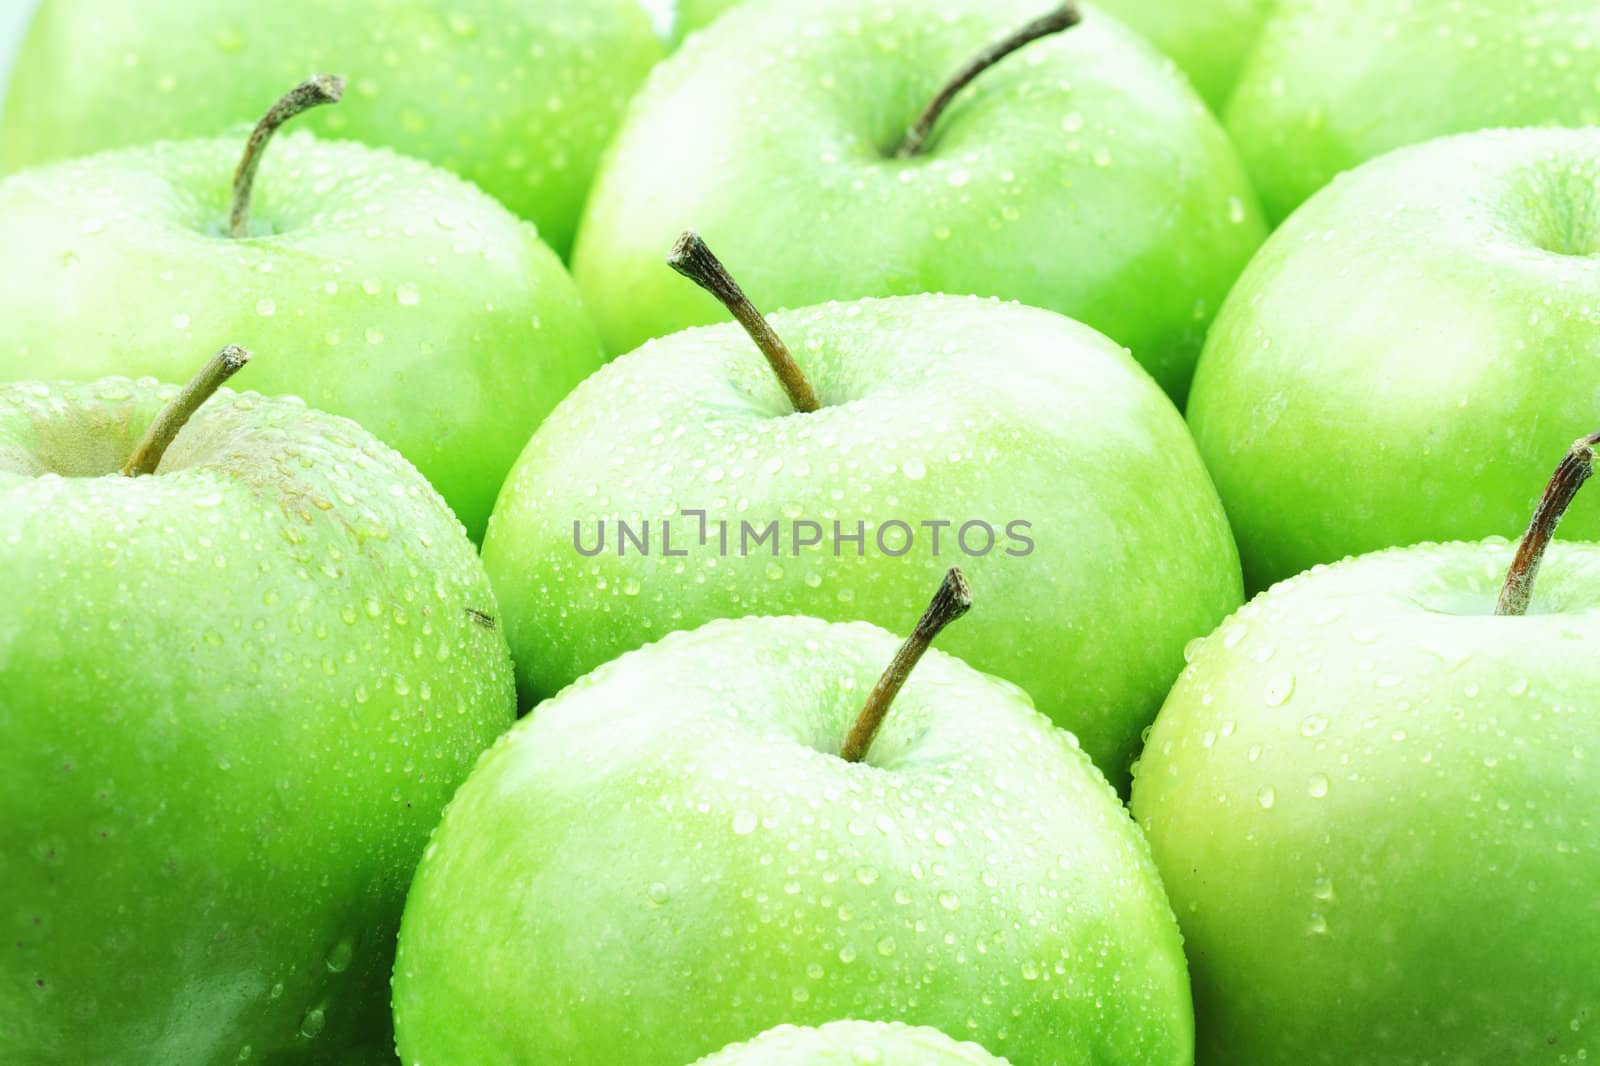 Freshly washed green apples ready to be eaten.